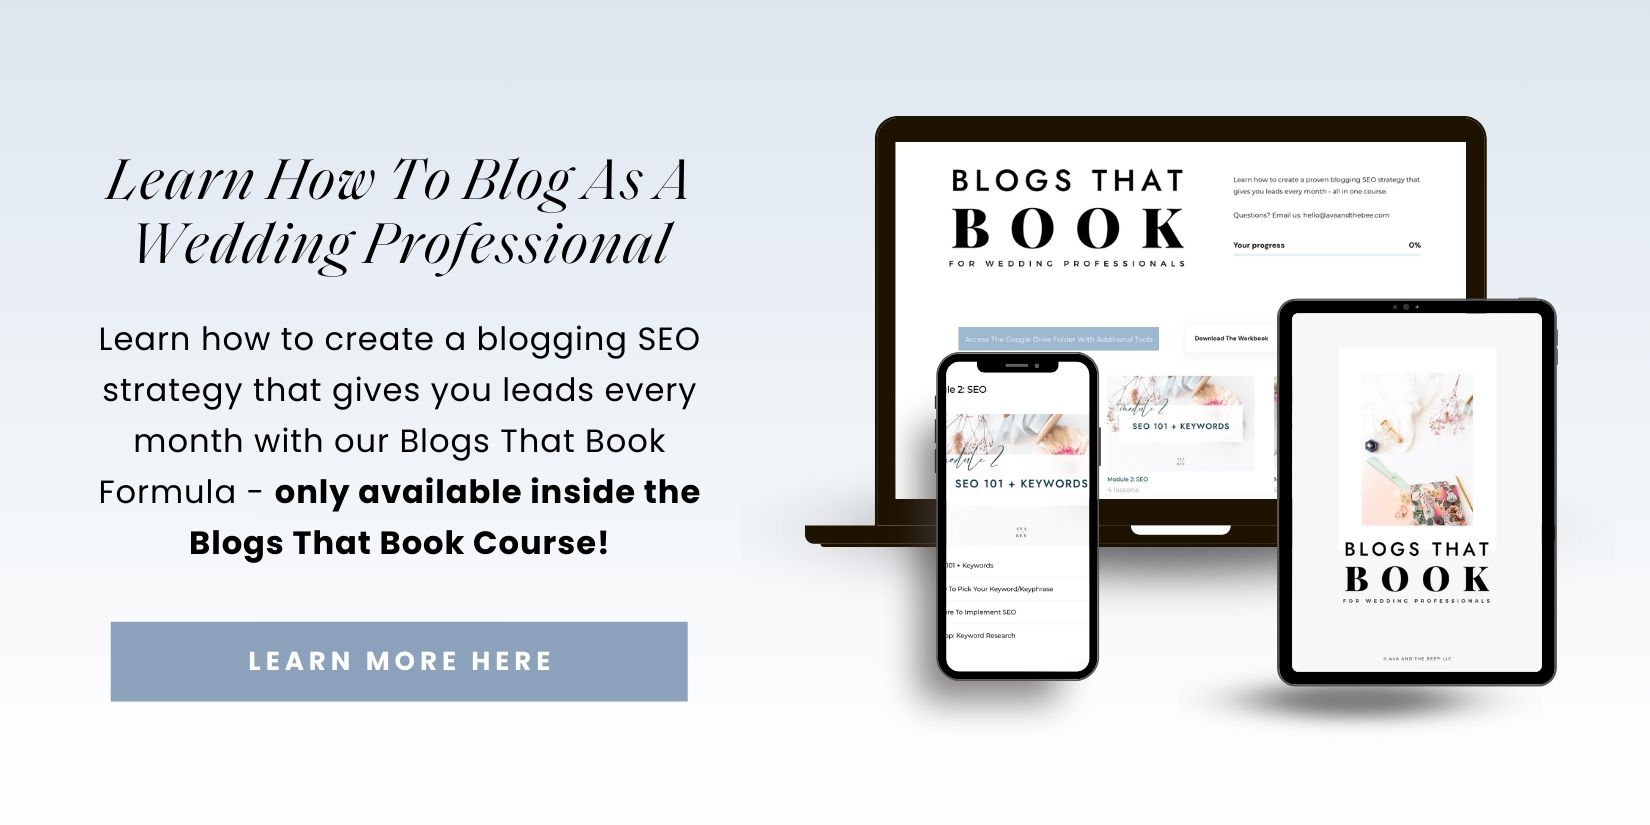 Blogging course for wedding vendors, professionals, planners and photographers